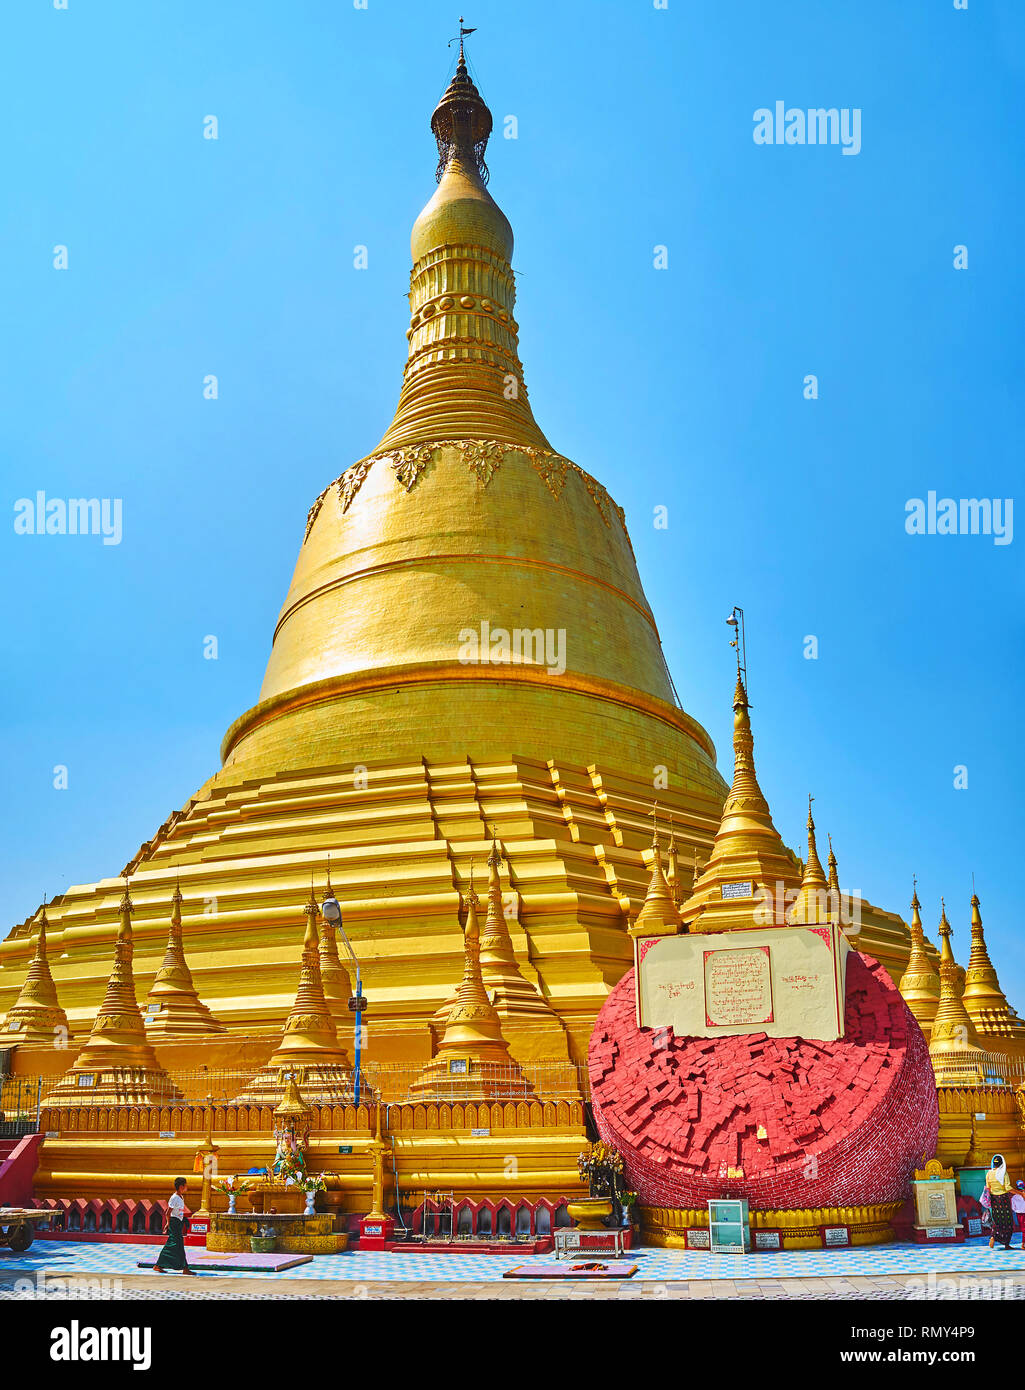 BAGO, MYANMAR - FEBRUARY 15, 2018: Panorama of the gilded stupa of Shwemawdaw Paya and the brick block at its foot, collapsed during the earthquake, o Stock Photo